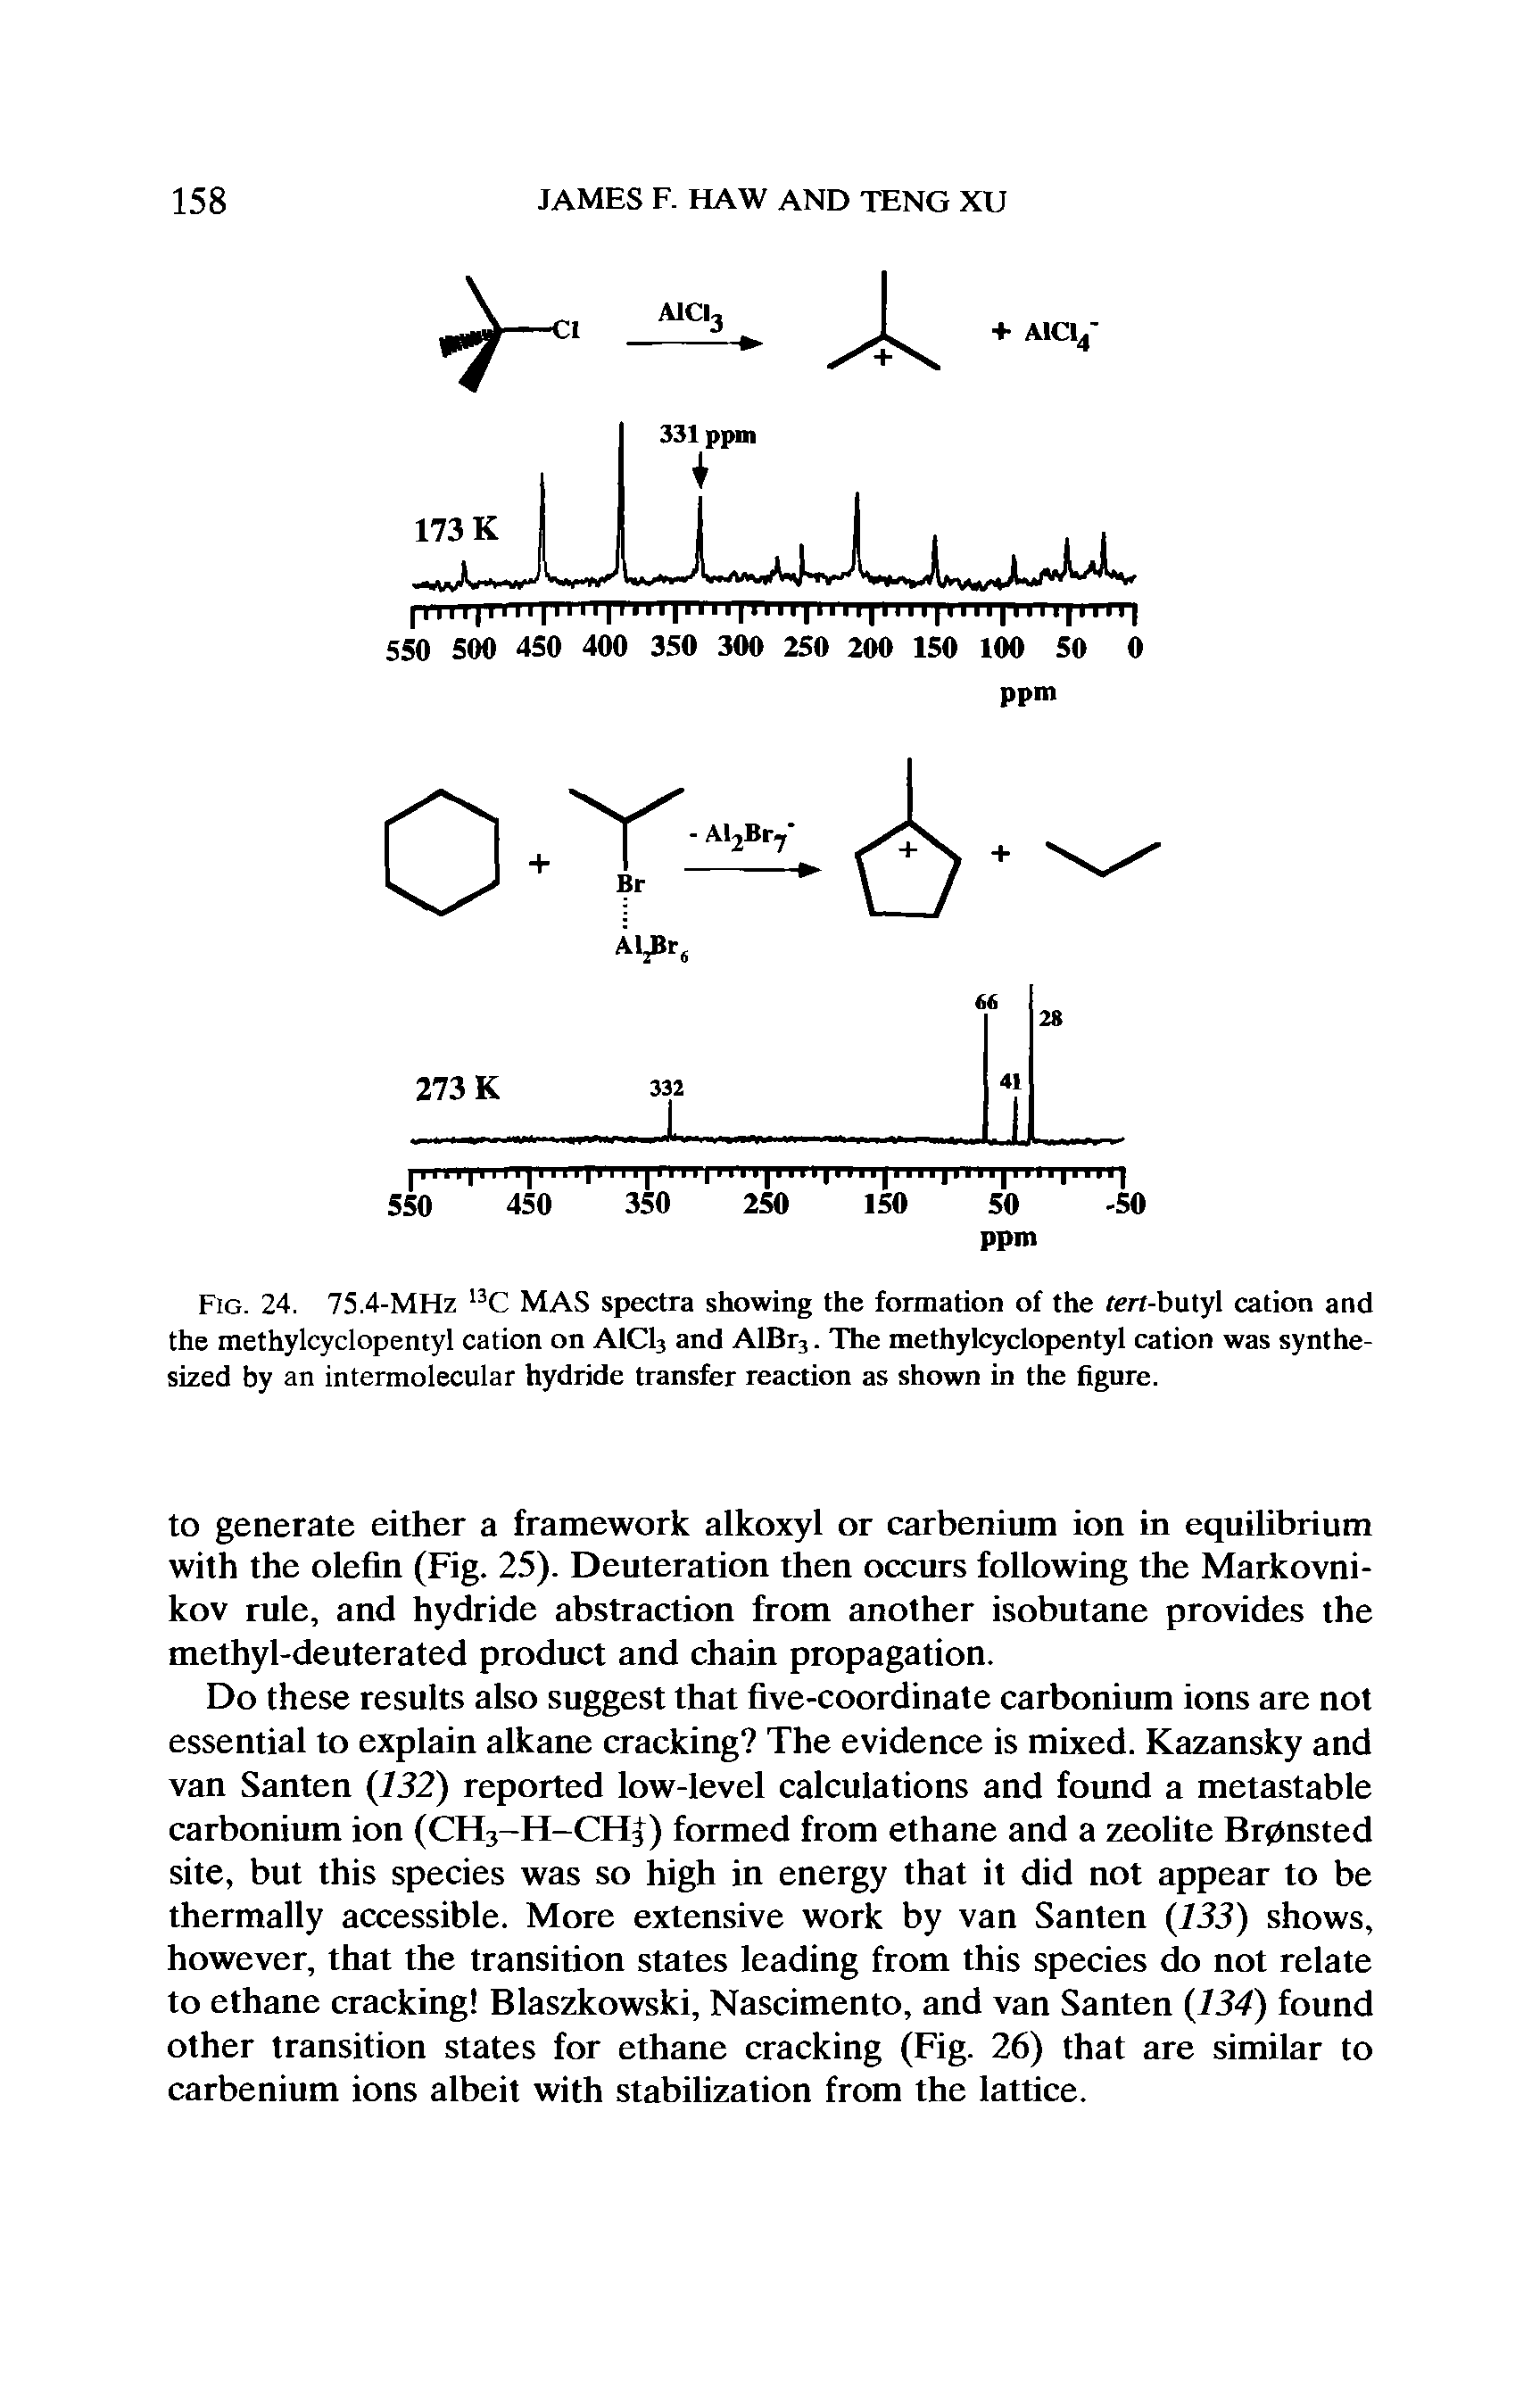 Fig. 24. 75.4-MHz 13C MAS spectra showing the formation of the fert-butyl cation and the methylcyclopentyl cation on A1C13 and AlBr3. The methylcyclopentyl cation was synthesized by an intermolecular hydride transfer reaction as shown in the figure.